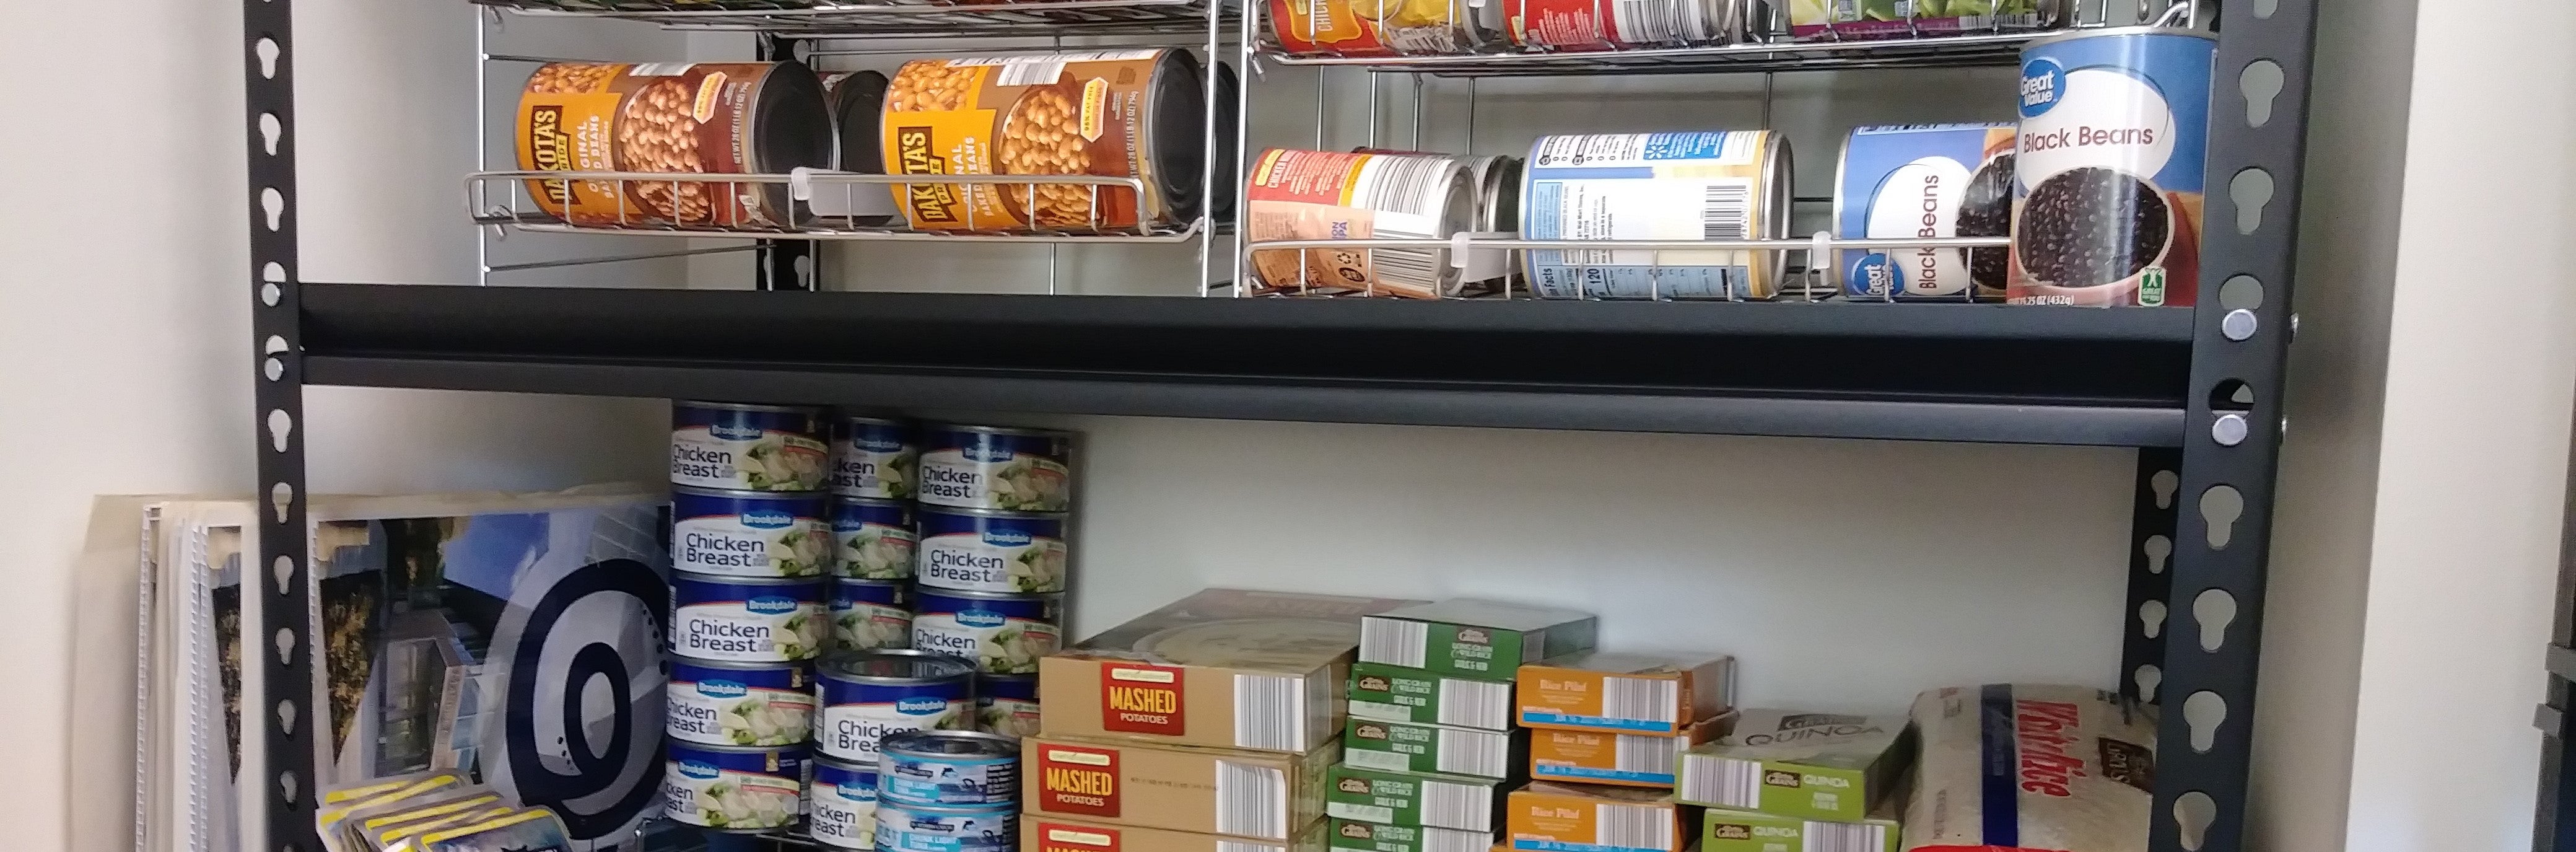 Food pantry market at the Office of Graduate Student Life in Tomlinson